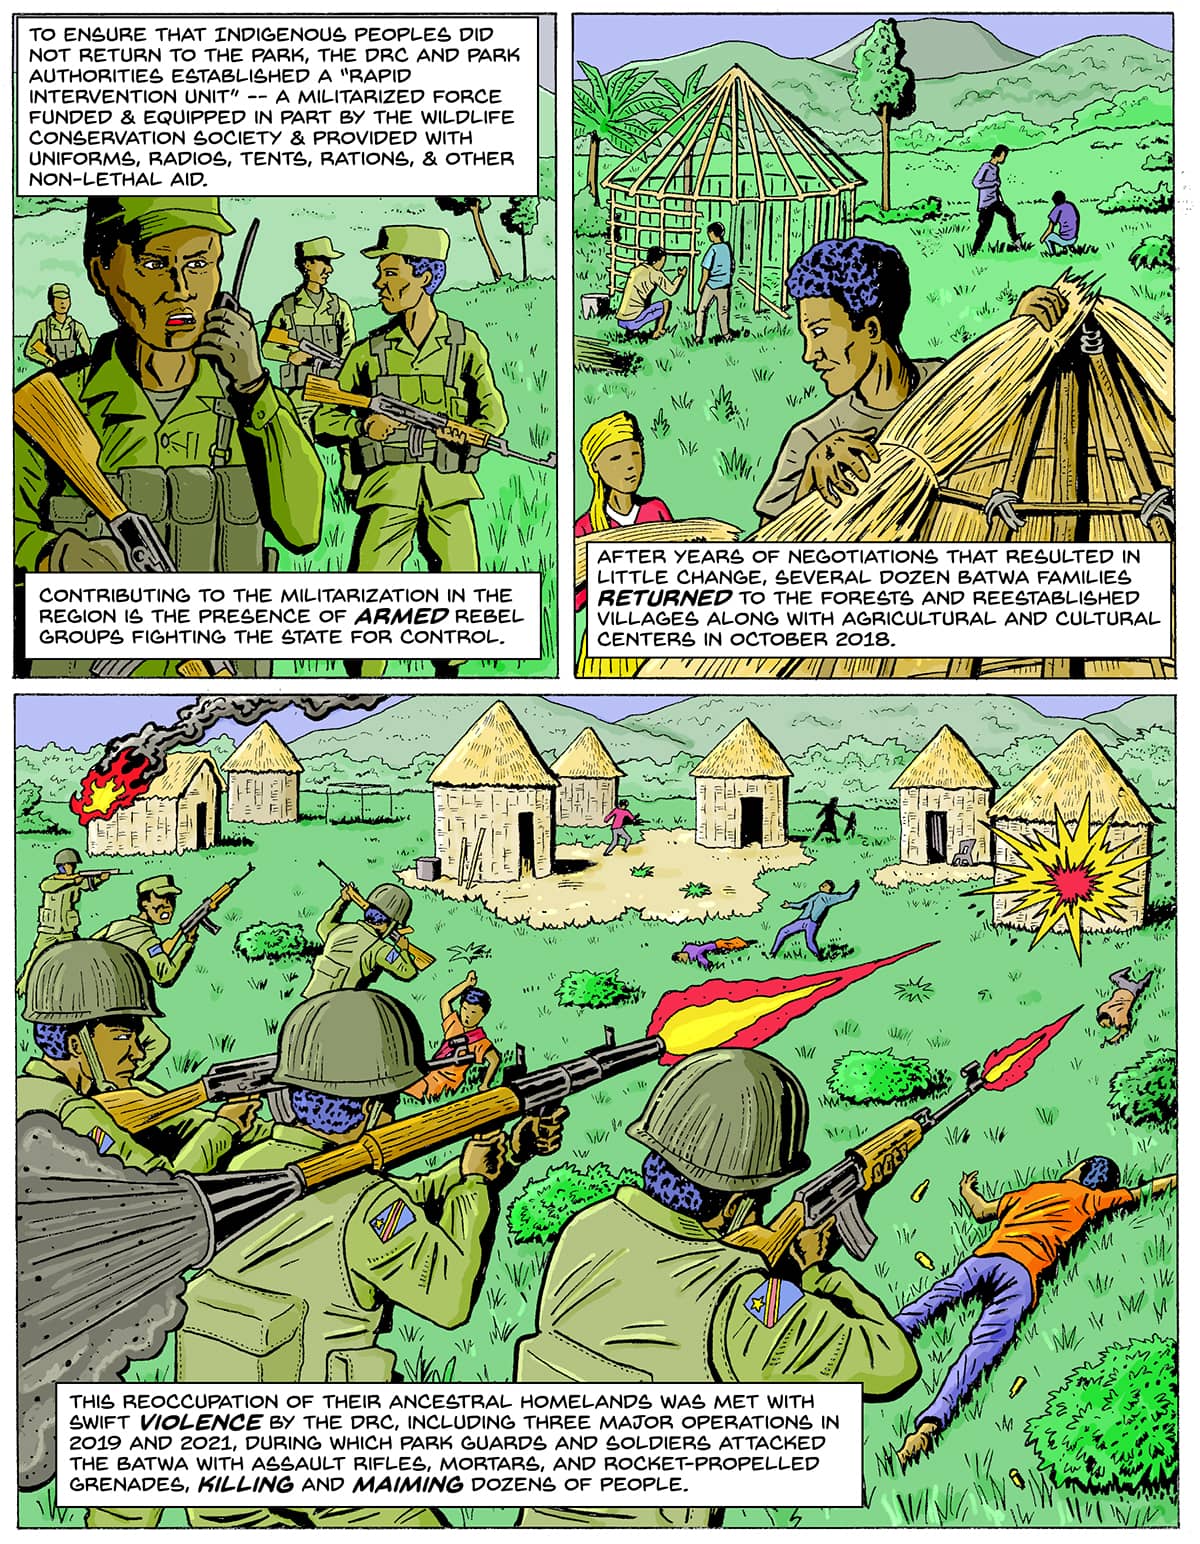 A three-panel illustration. Top left: Men in green uniforms holding guns talk on a walkee-talkee. Top right: People build huts out of stick and yellow straw-like material. Bottom: Men with guns fire at the village. Text: To ensure that Indigenous peoples did not return to the park, the DRC and park authorities established a “rapid intervention unit” — a militarized force funded and equipped in part by the Wildlife Conservation Society and provided with uniforms, radios, tents, rations, and other non-lethal aid. Contributing to the militarization in the region is the presence of armed rebel groups fighting the state for control. After years of negotiations that resulted in little change, several dozen Batwa families returned to the forests and reestablished villages along with agricultural and cultural centers in October 2018. This reoccupation of their ancestral homelands was met with swift violence by the DRC, including three major operations in 2019 and 2021, during which park guards and soldiers attacked the Batwa with assault rifles, mortars, and rocket-propelled grenades, killing and maiming dozens of people.